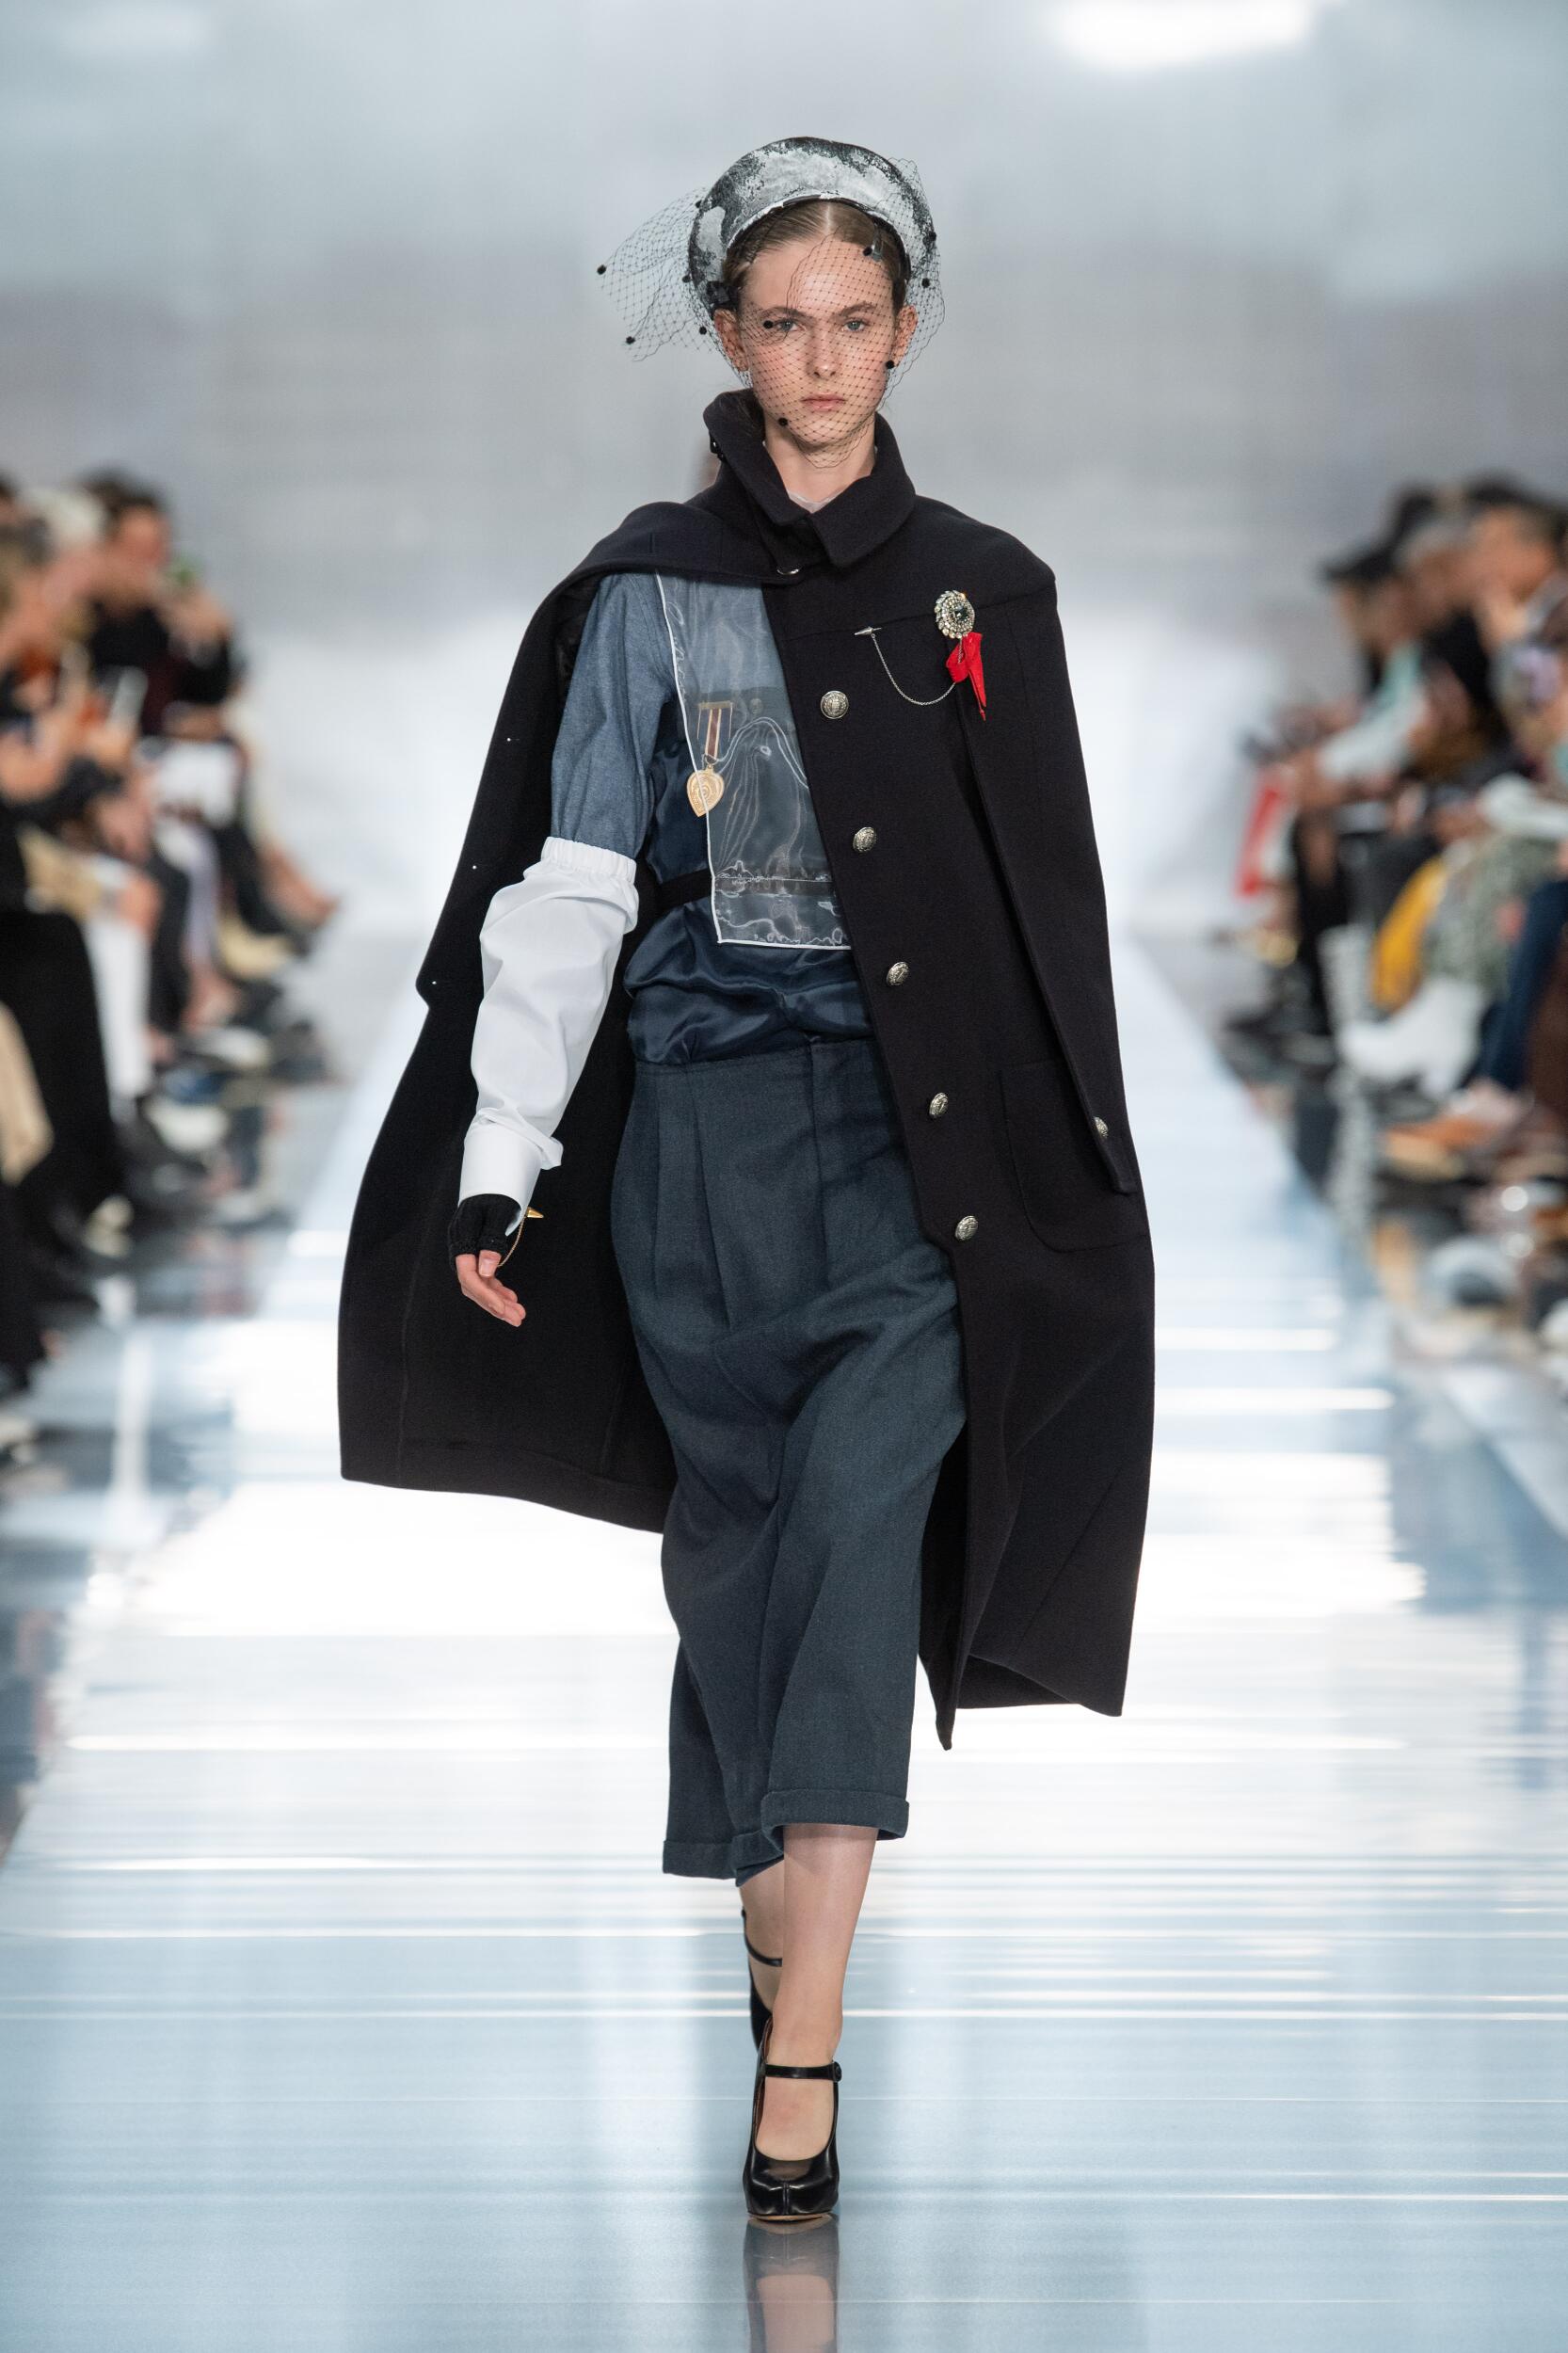 MAISON MARGIELA SPRING SUMMER 2020 COLLECTION | The Skinny Beep